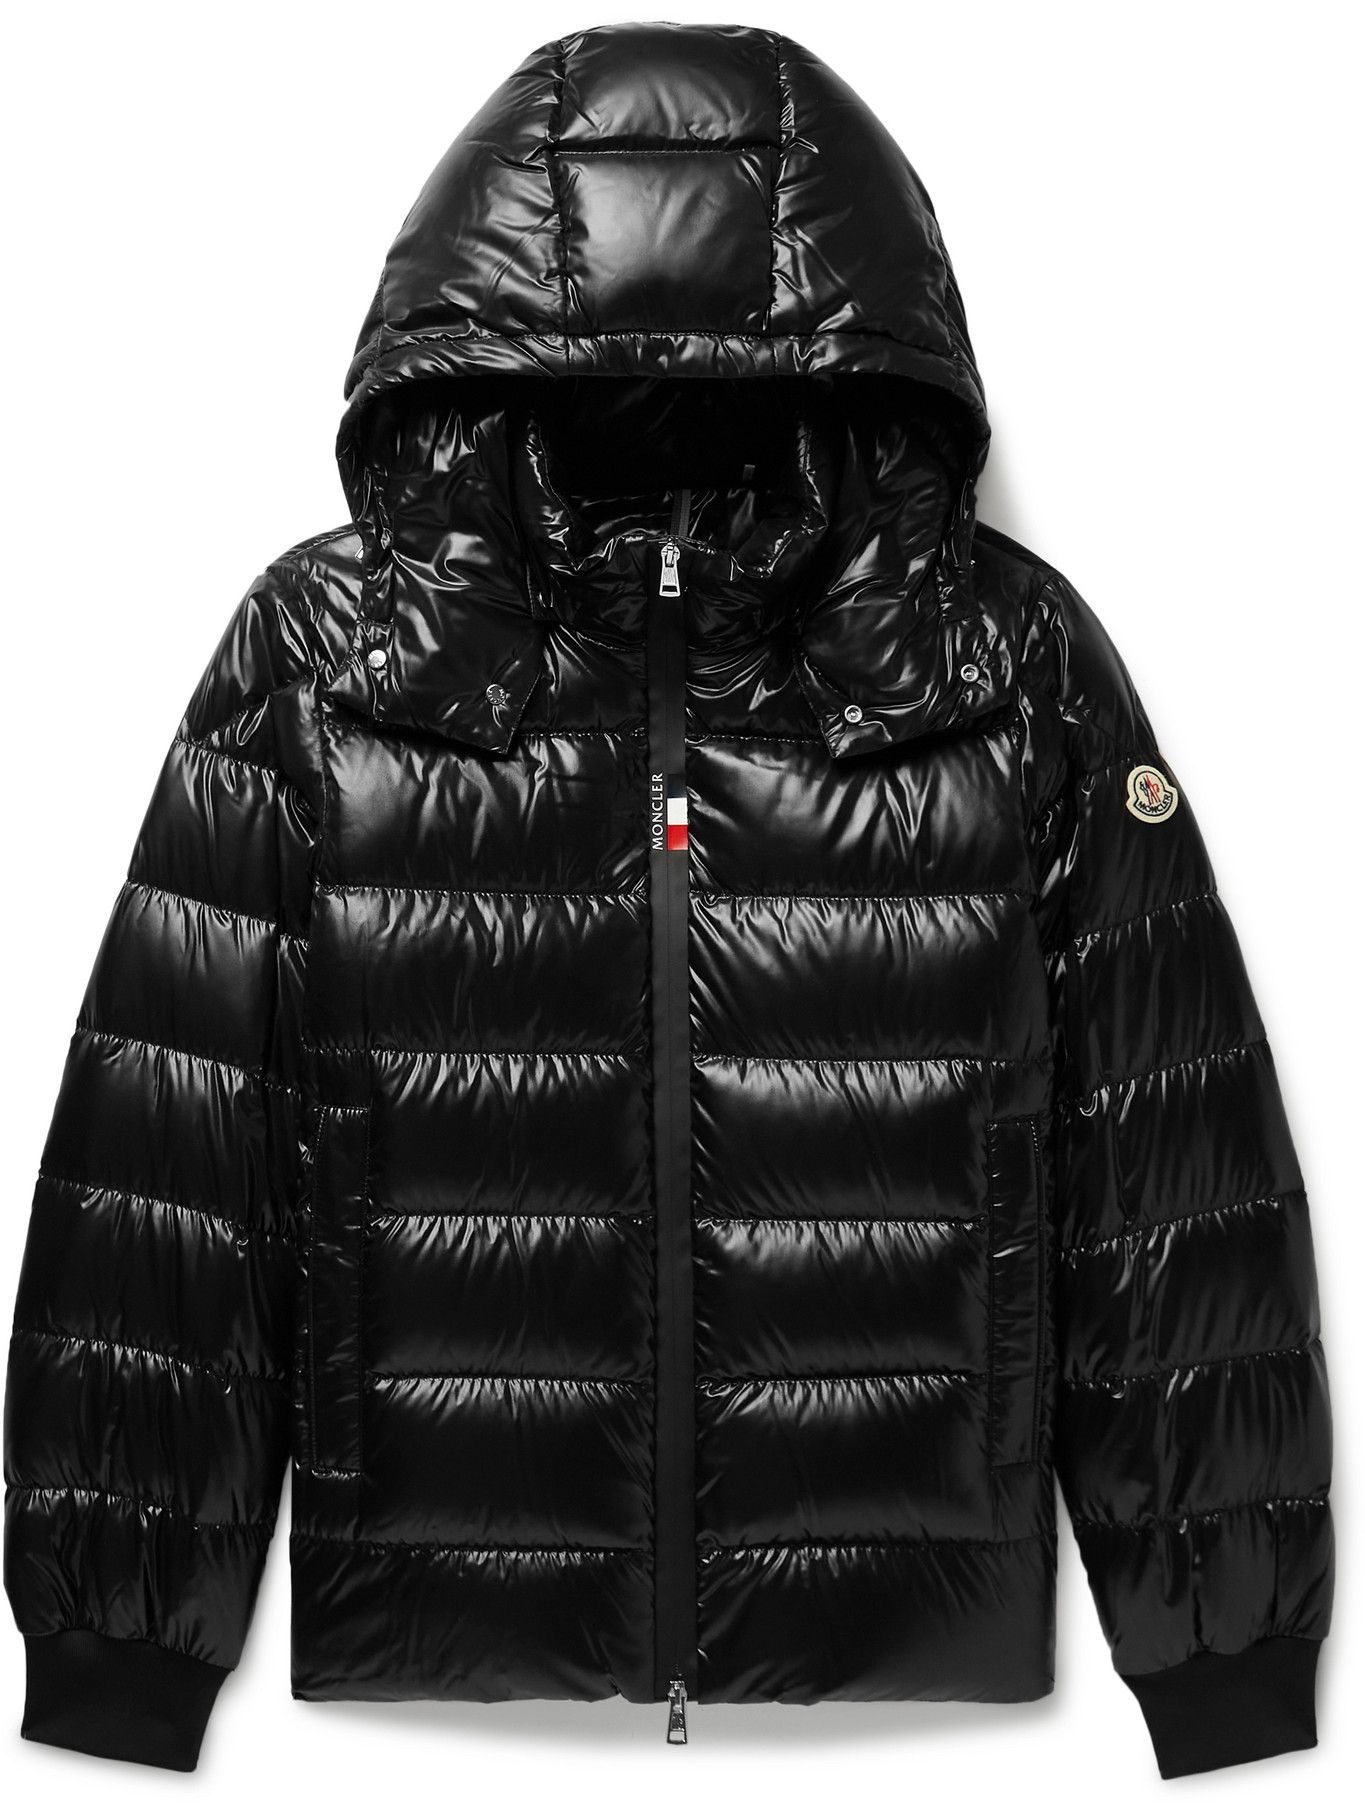 Moncler - Cuvellier Quilted Shell Down Jacket - Black Moncler